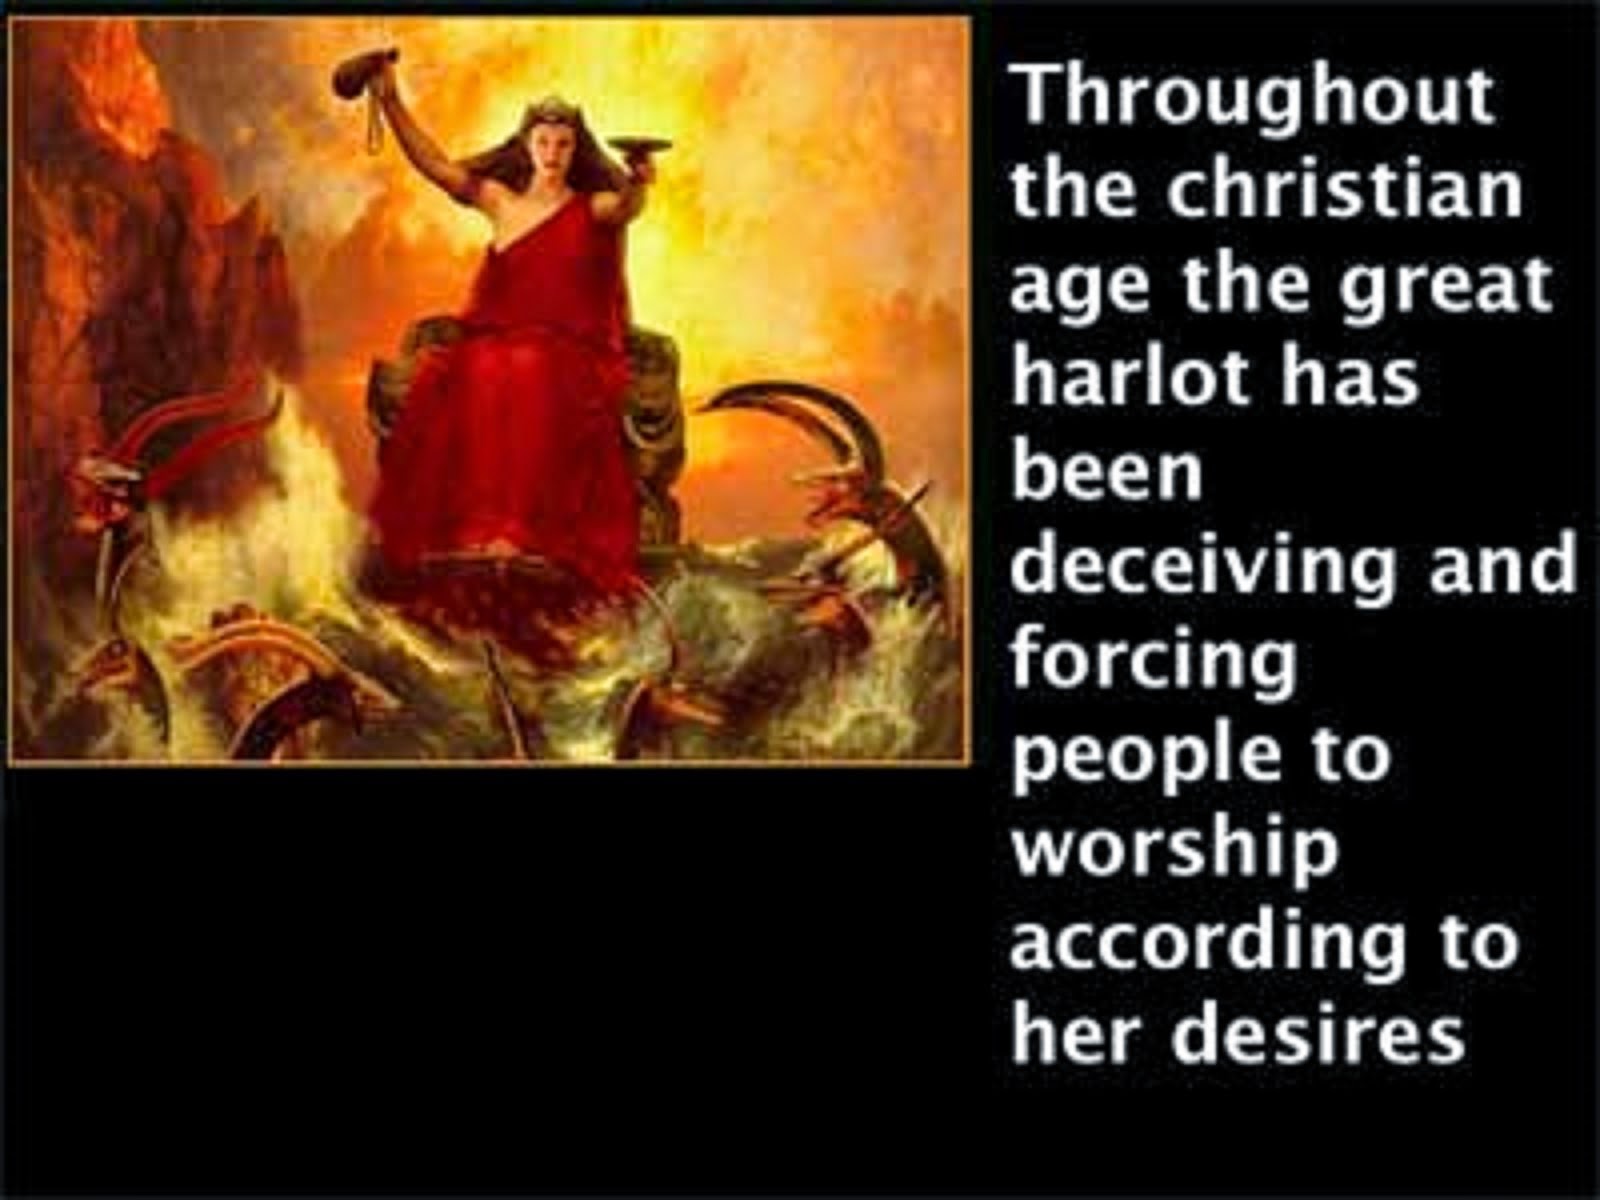 THE GREAT HARLOT HAS BEE THROUGH OUT THE CHRISTIAN AGE HAS BEEN DECEIVING THE OTHER CHURCHES